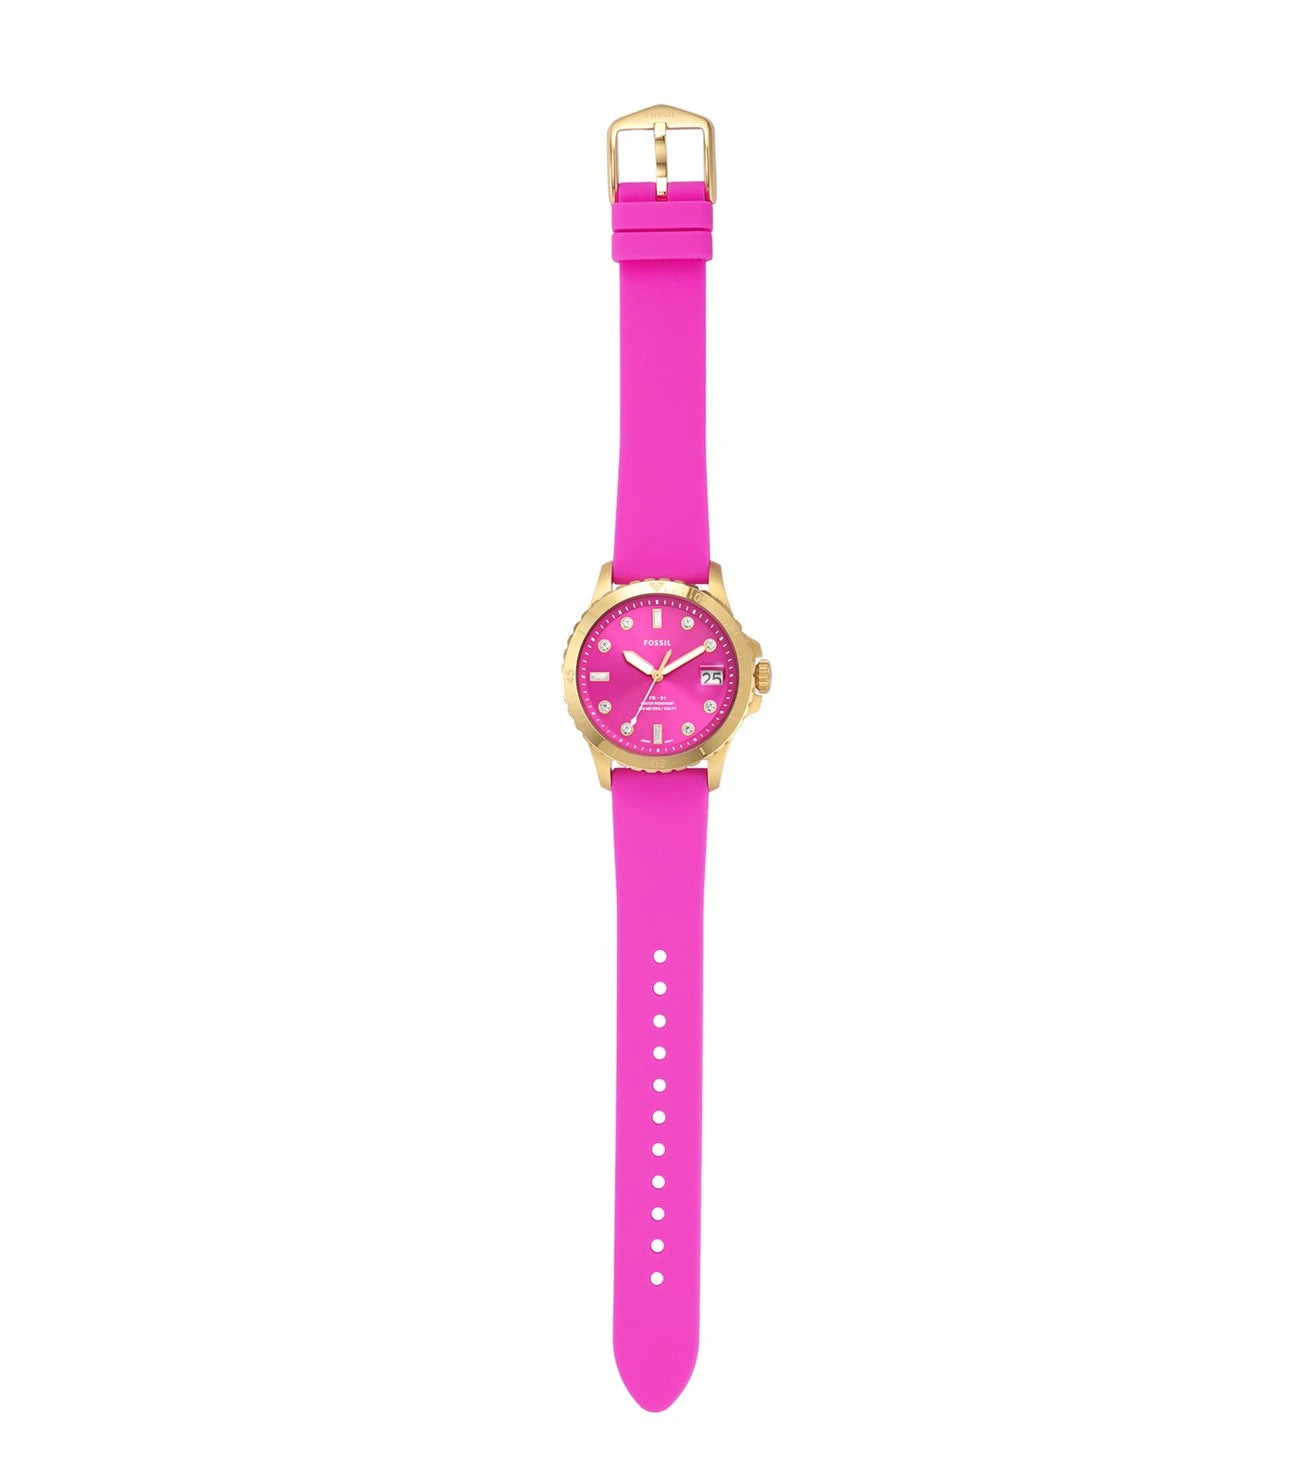 ES5290 | FOSSIL Fb-01 Watch for Women